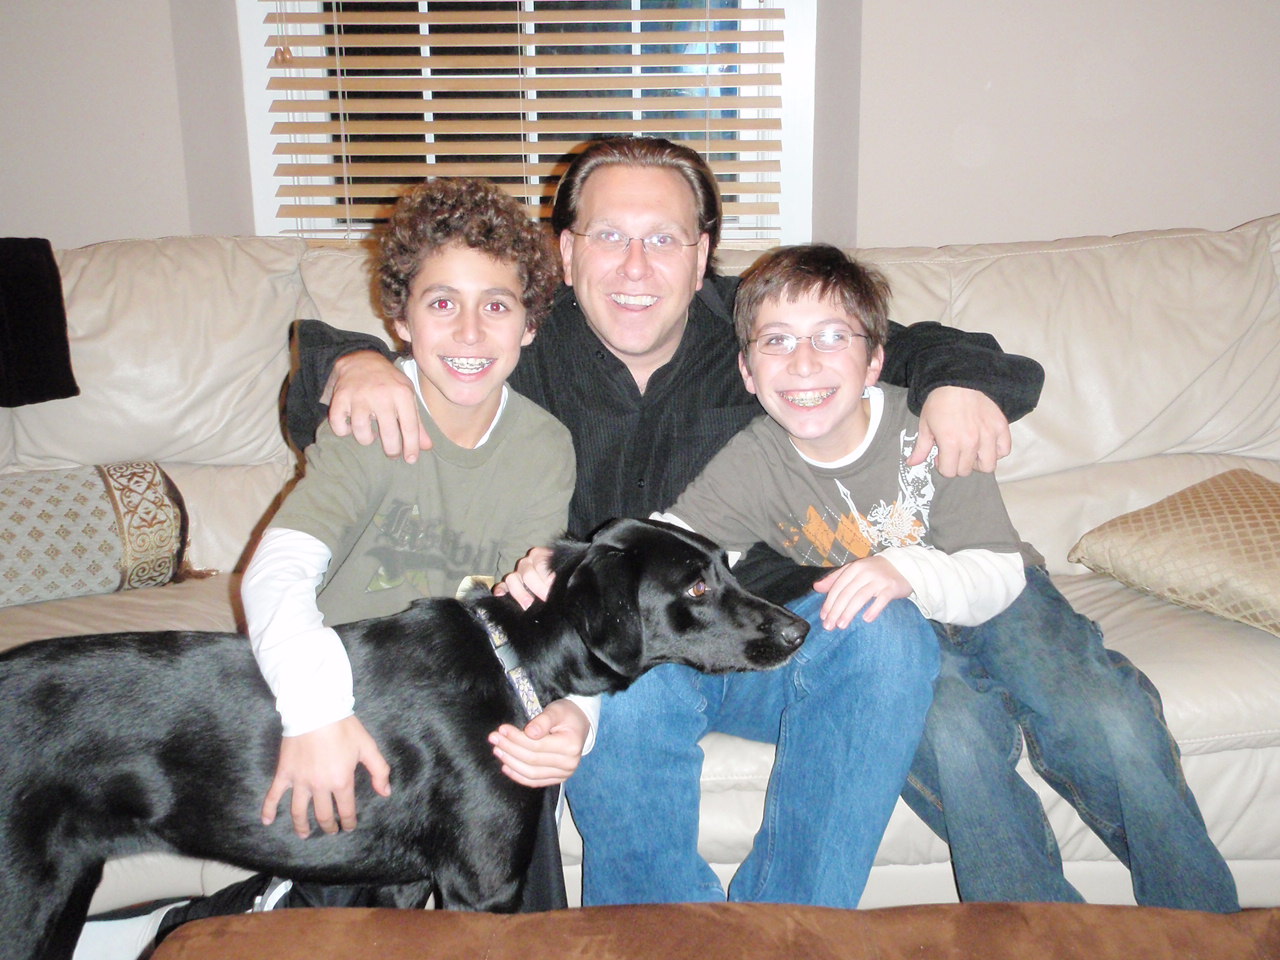 Me with Ben (left) and Noah Rubin and their dog, Daisy.  